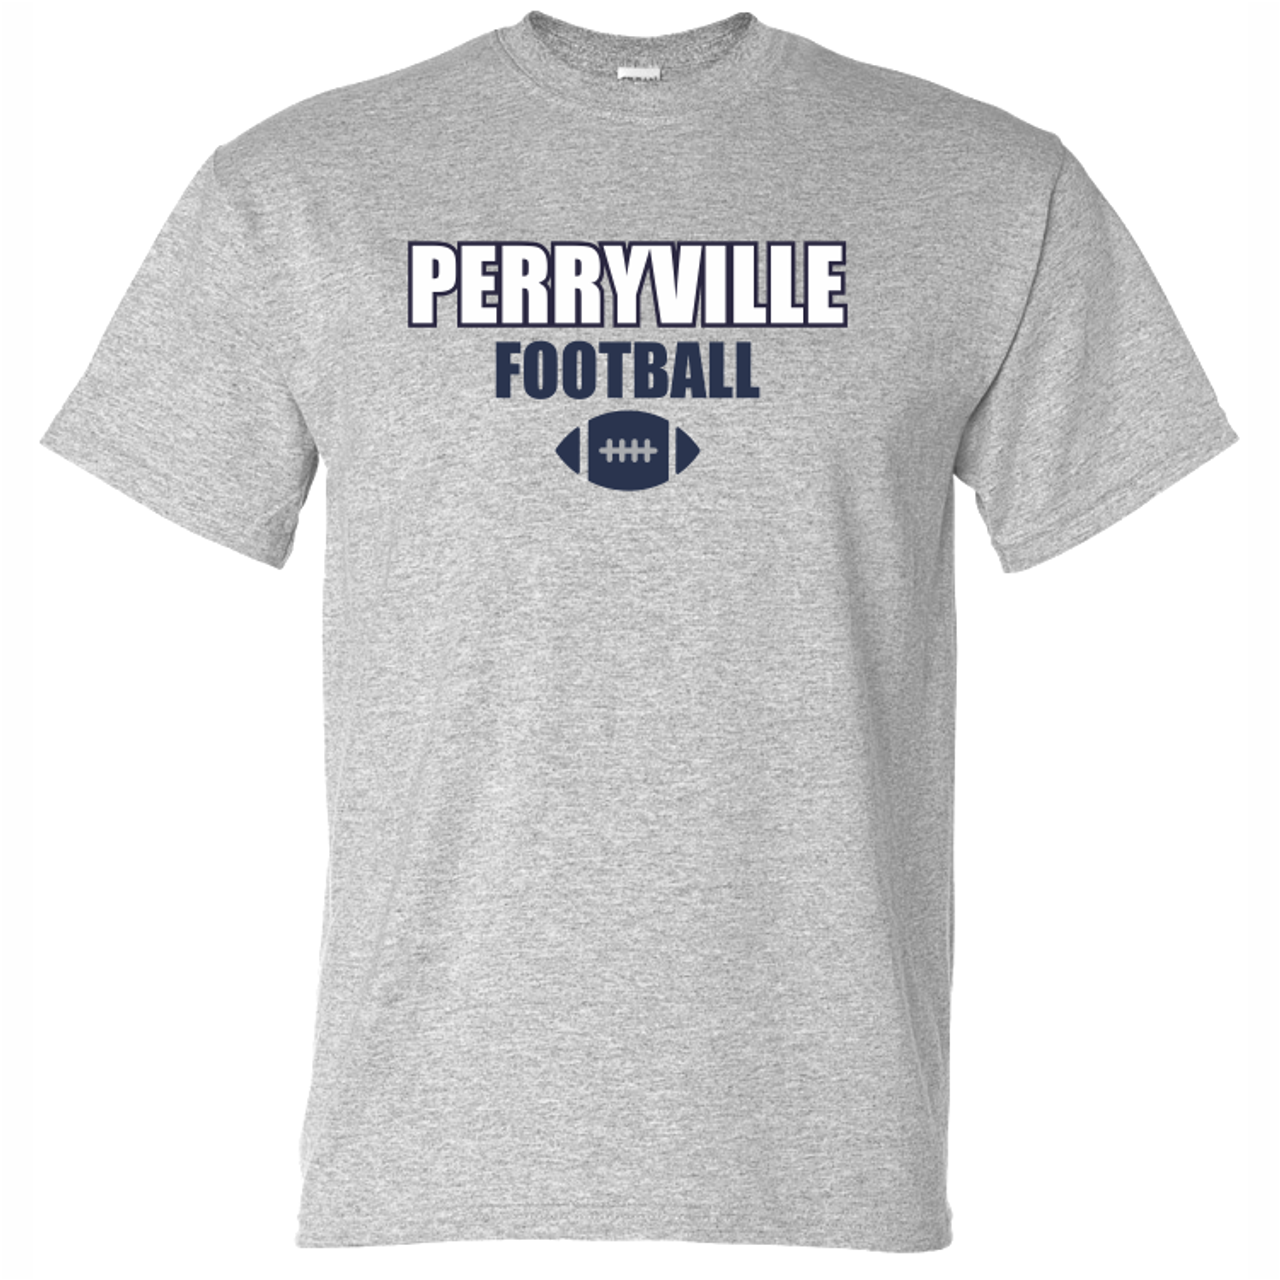 Perryville MS Football T-Shirt, Gray